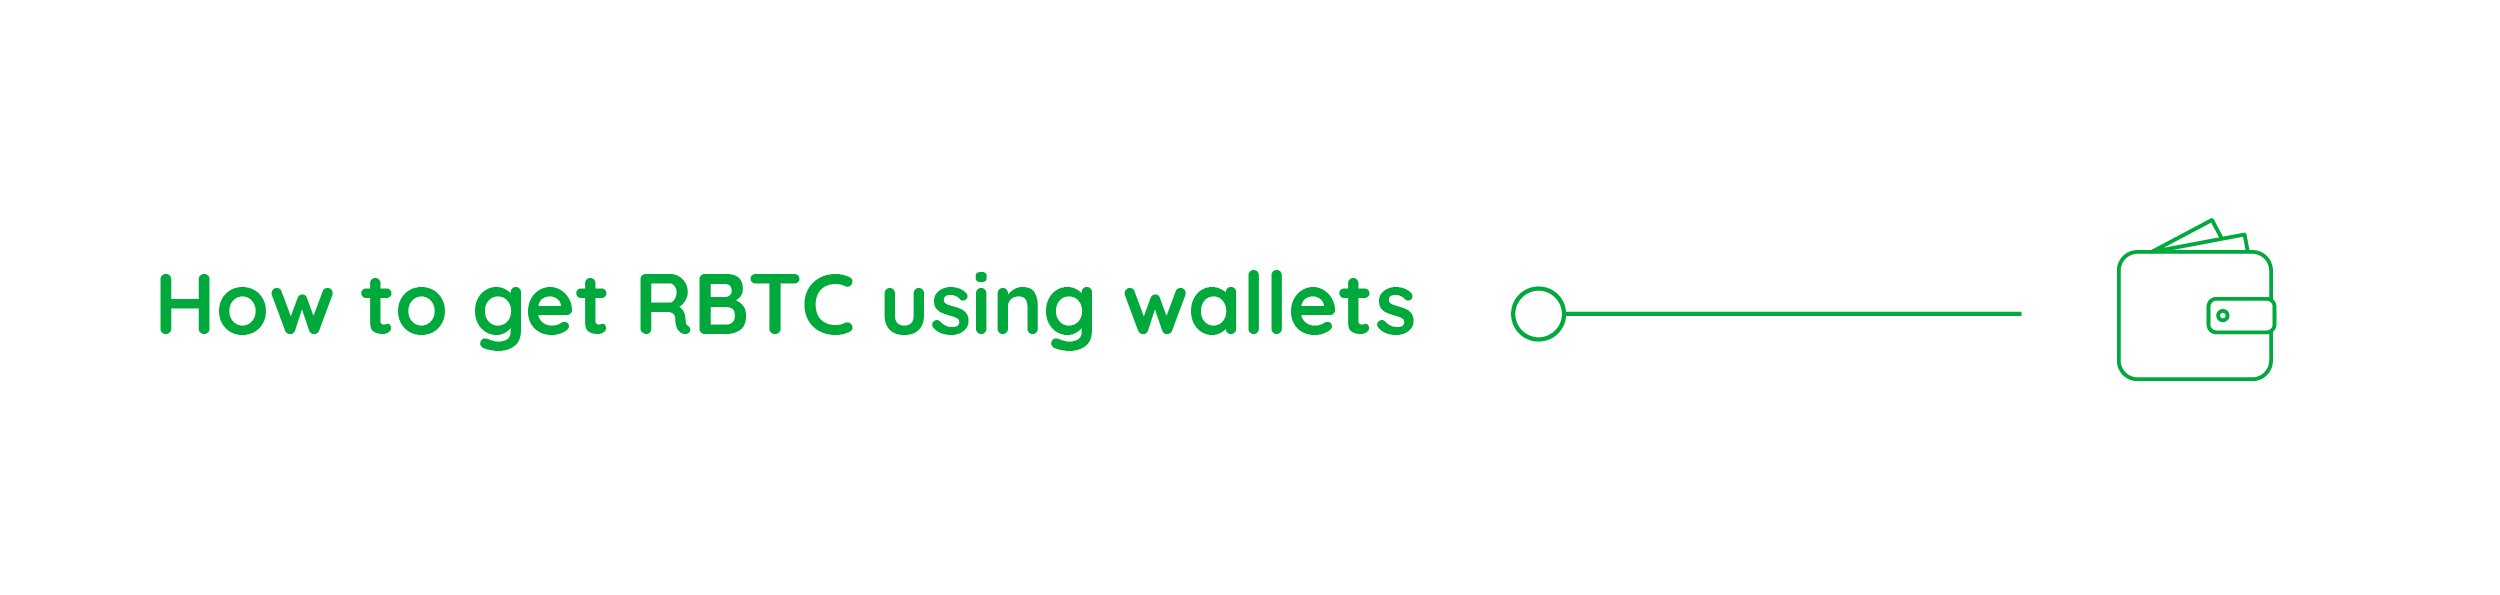 How to get RBTC using wallets